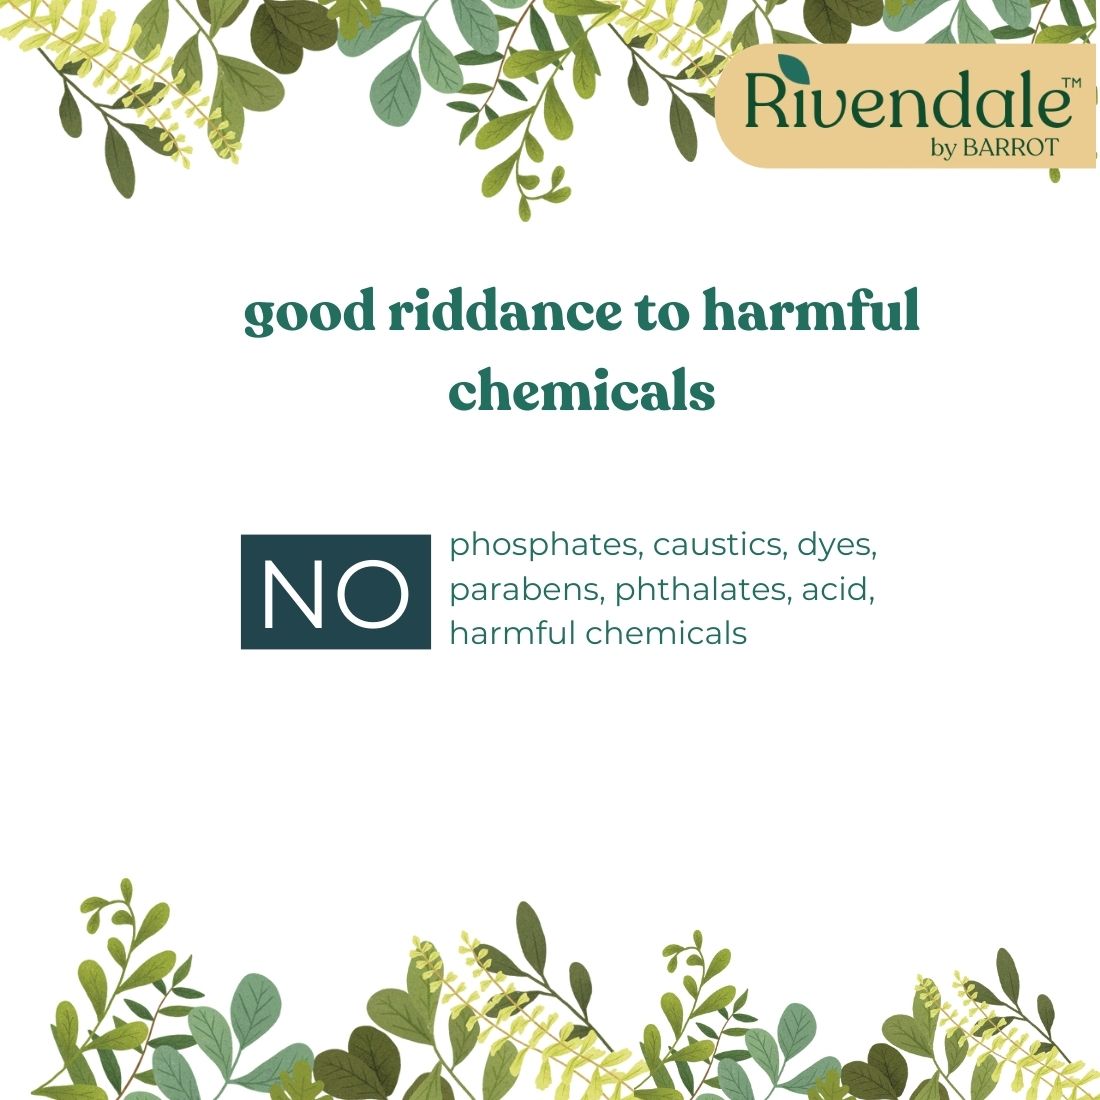 RIVENDALE Kitchen Cleaner 500ml